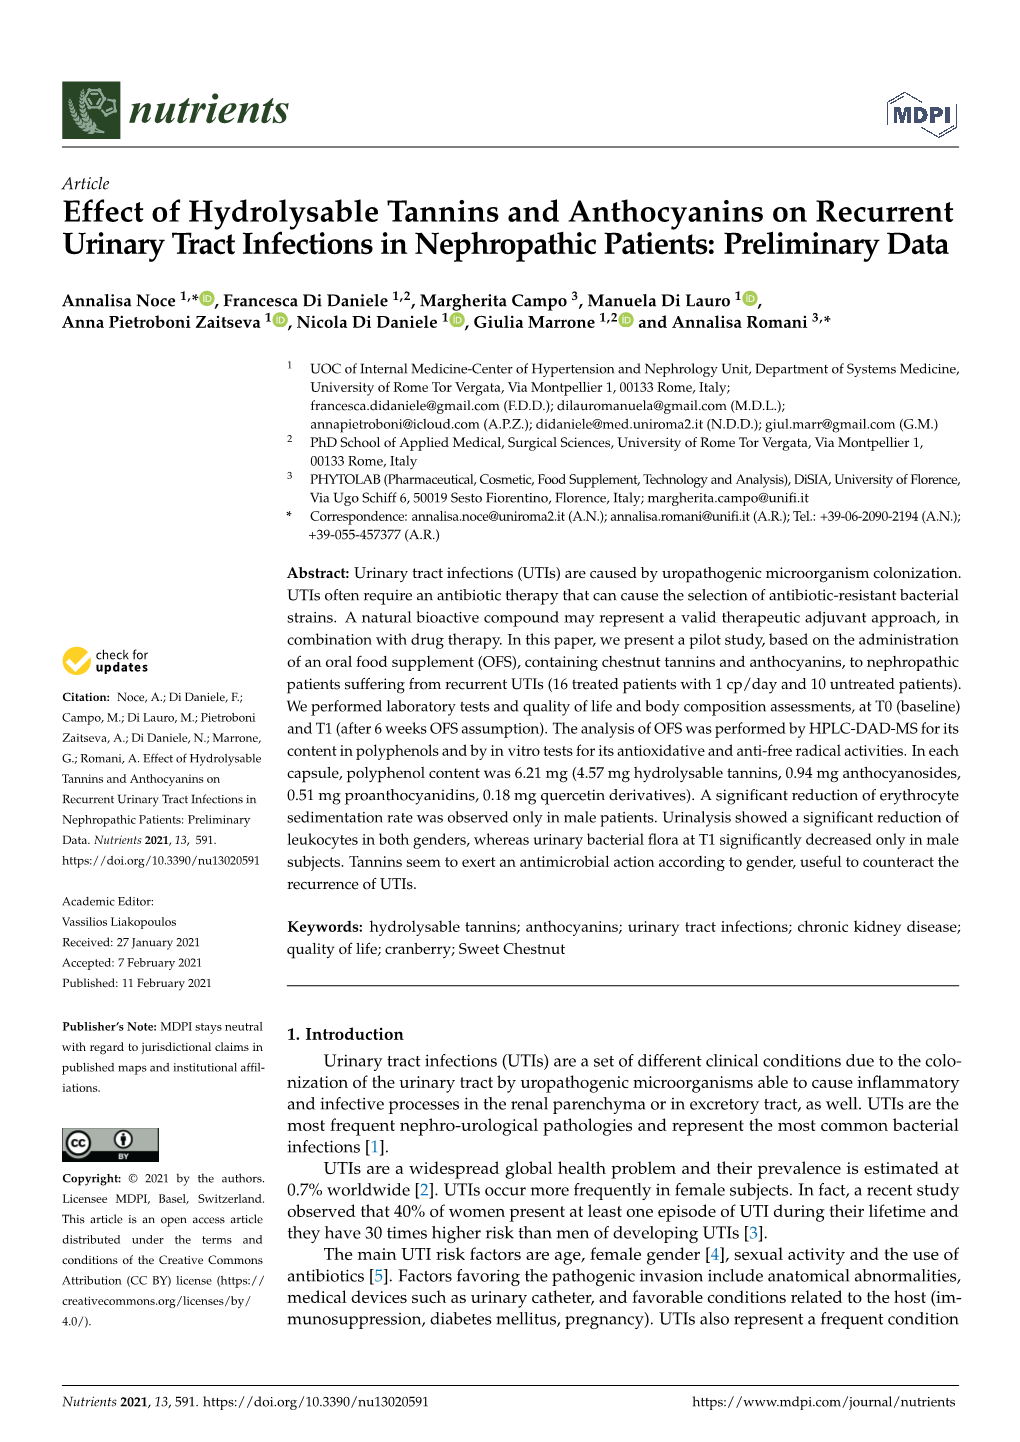 Effect of Hydrolysable Tannins and Anthocyanins on Recurrent Urinary Tract Infections in Nephropathic Patients: Preliminary Data